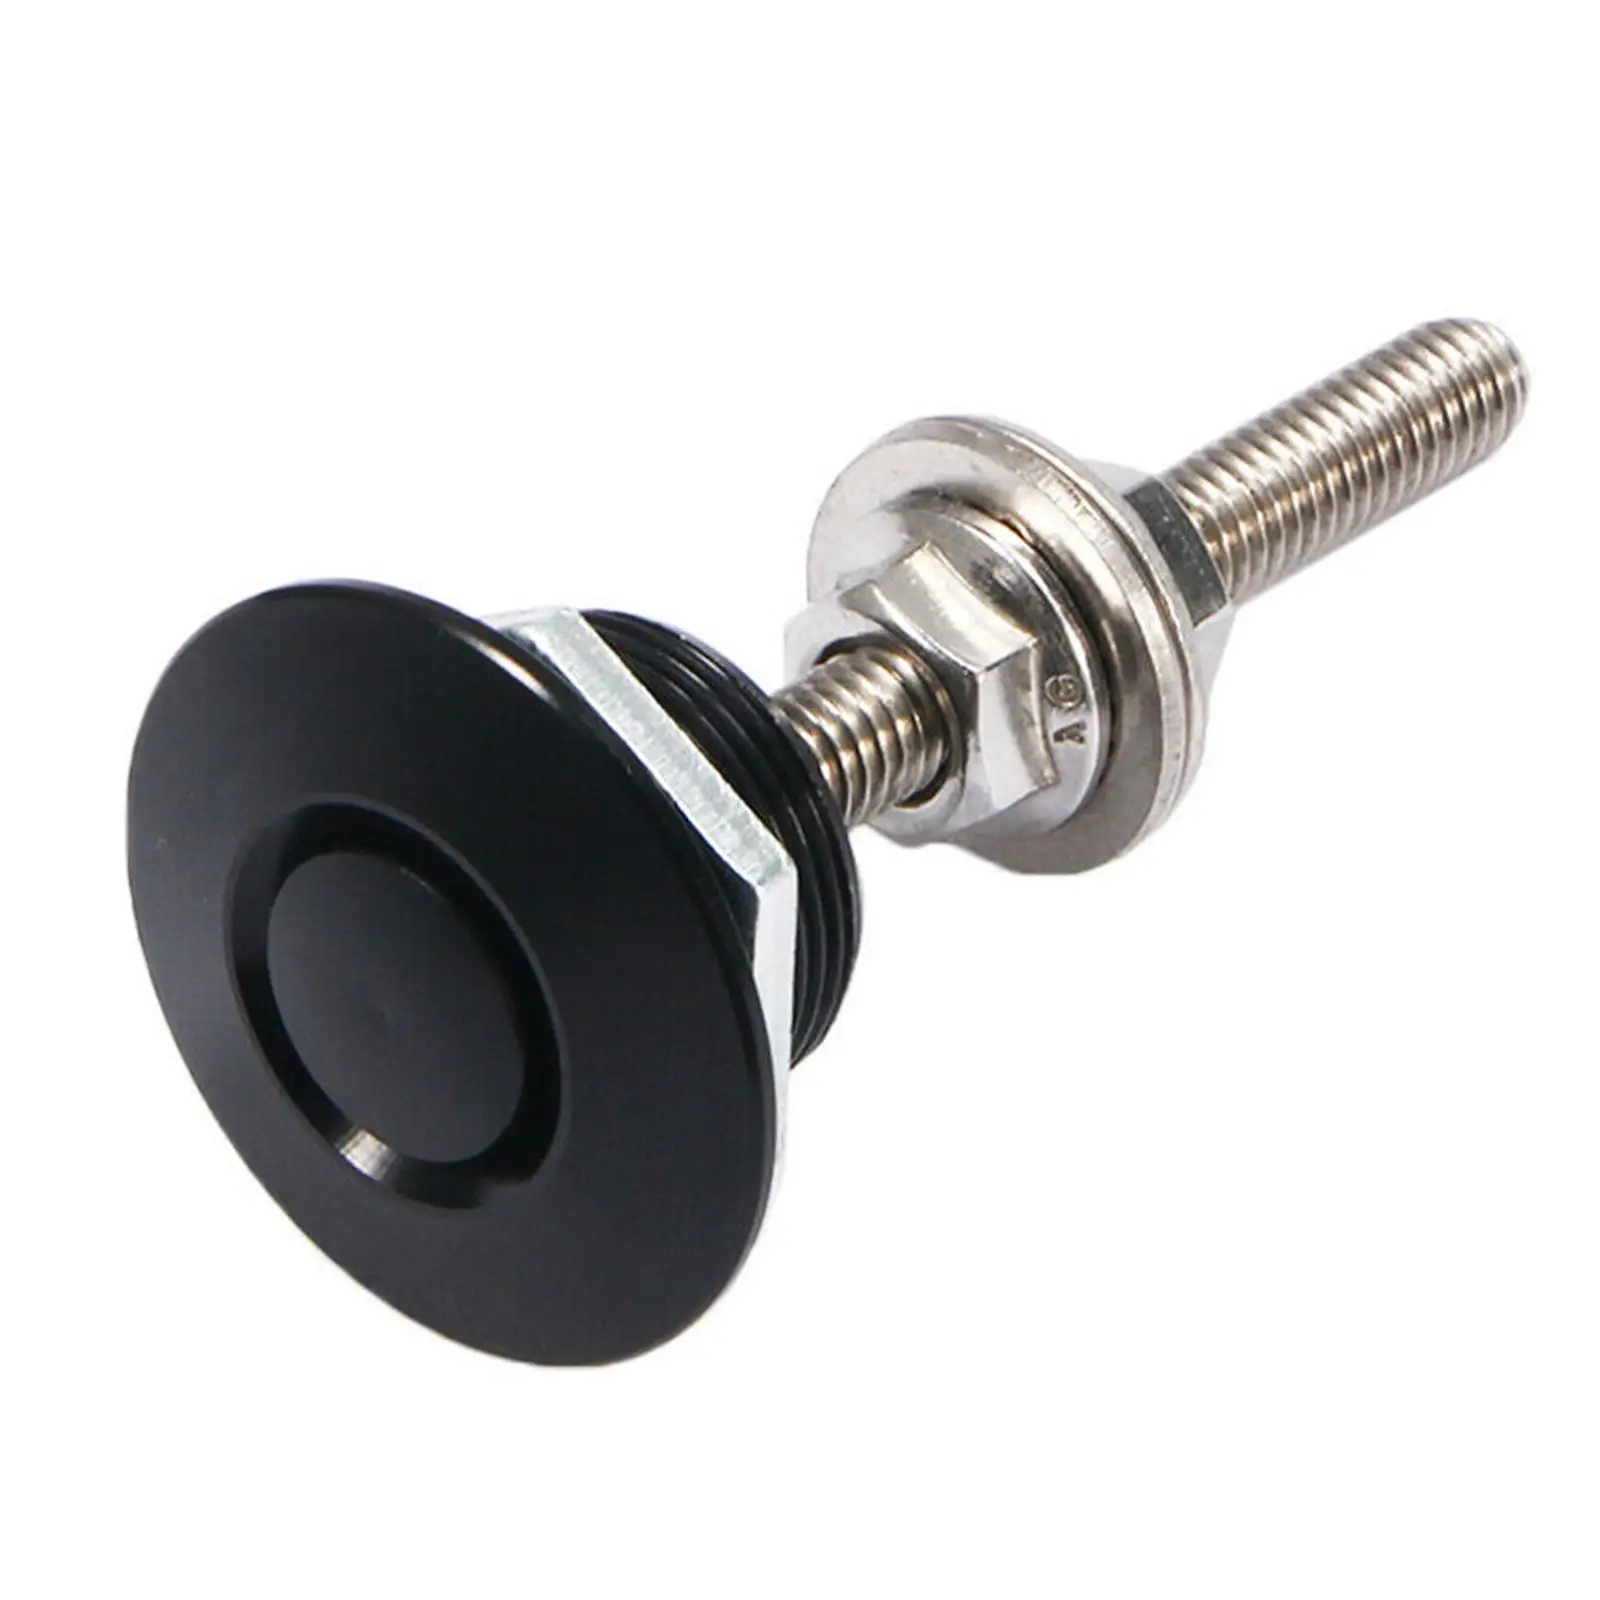 3cm Bonnets Hood Pins Lock Clip Quick Release Quick Latch Stainless Steel Screw